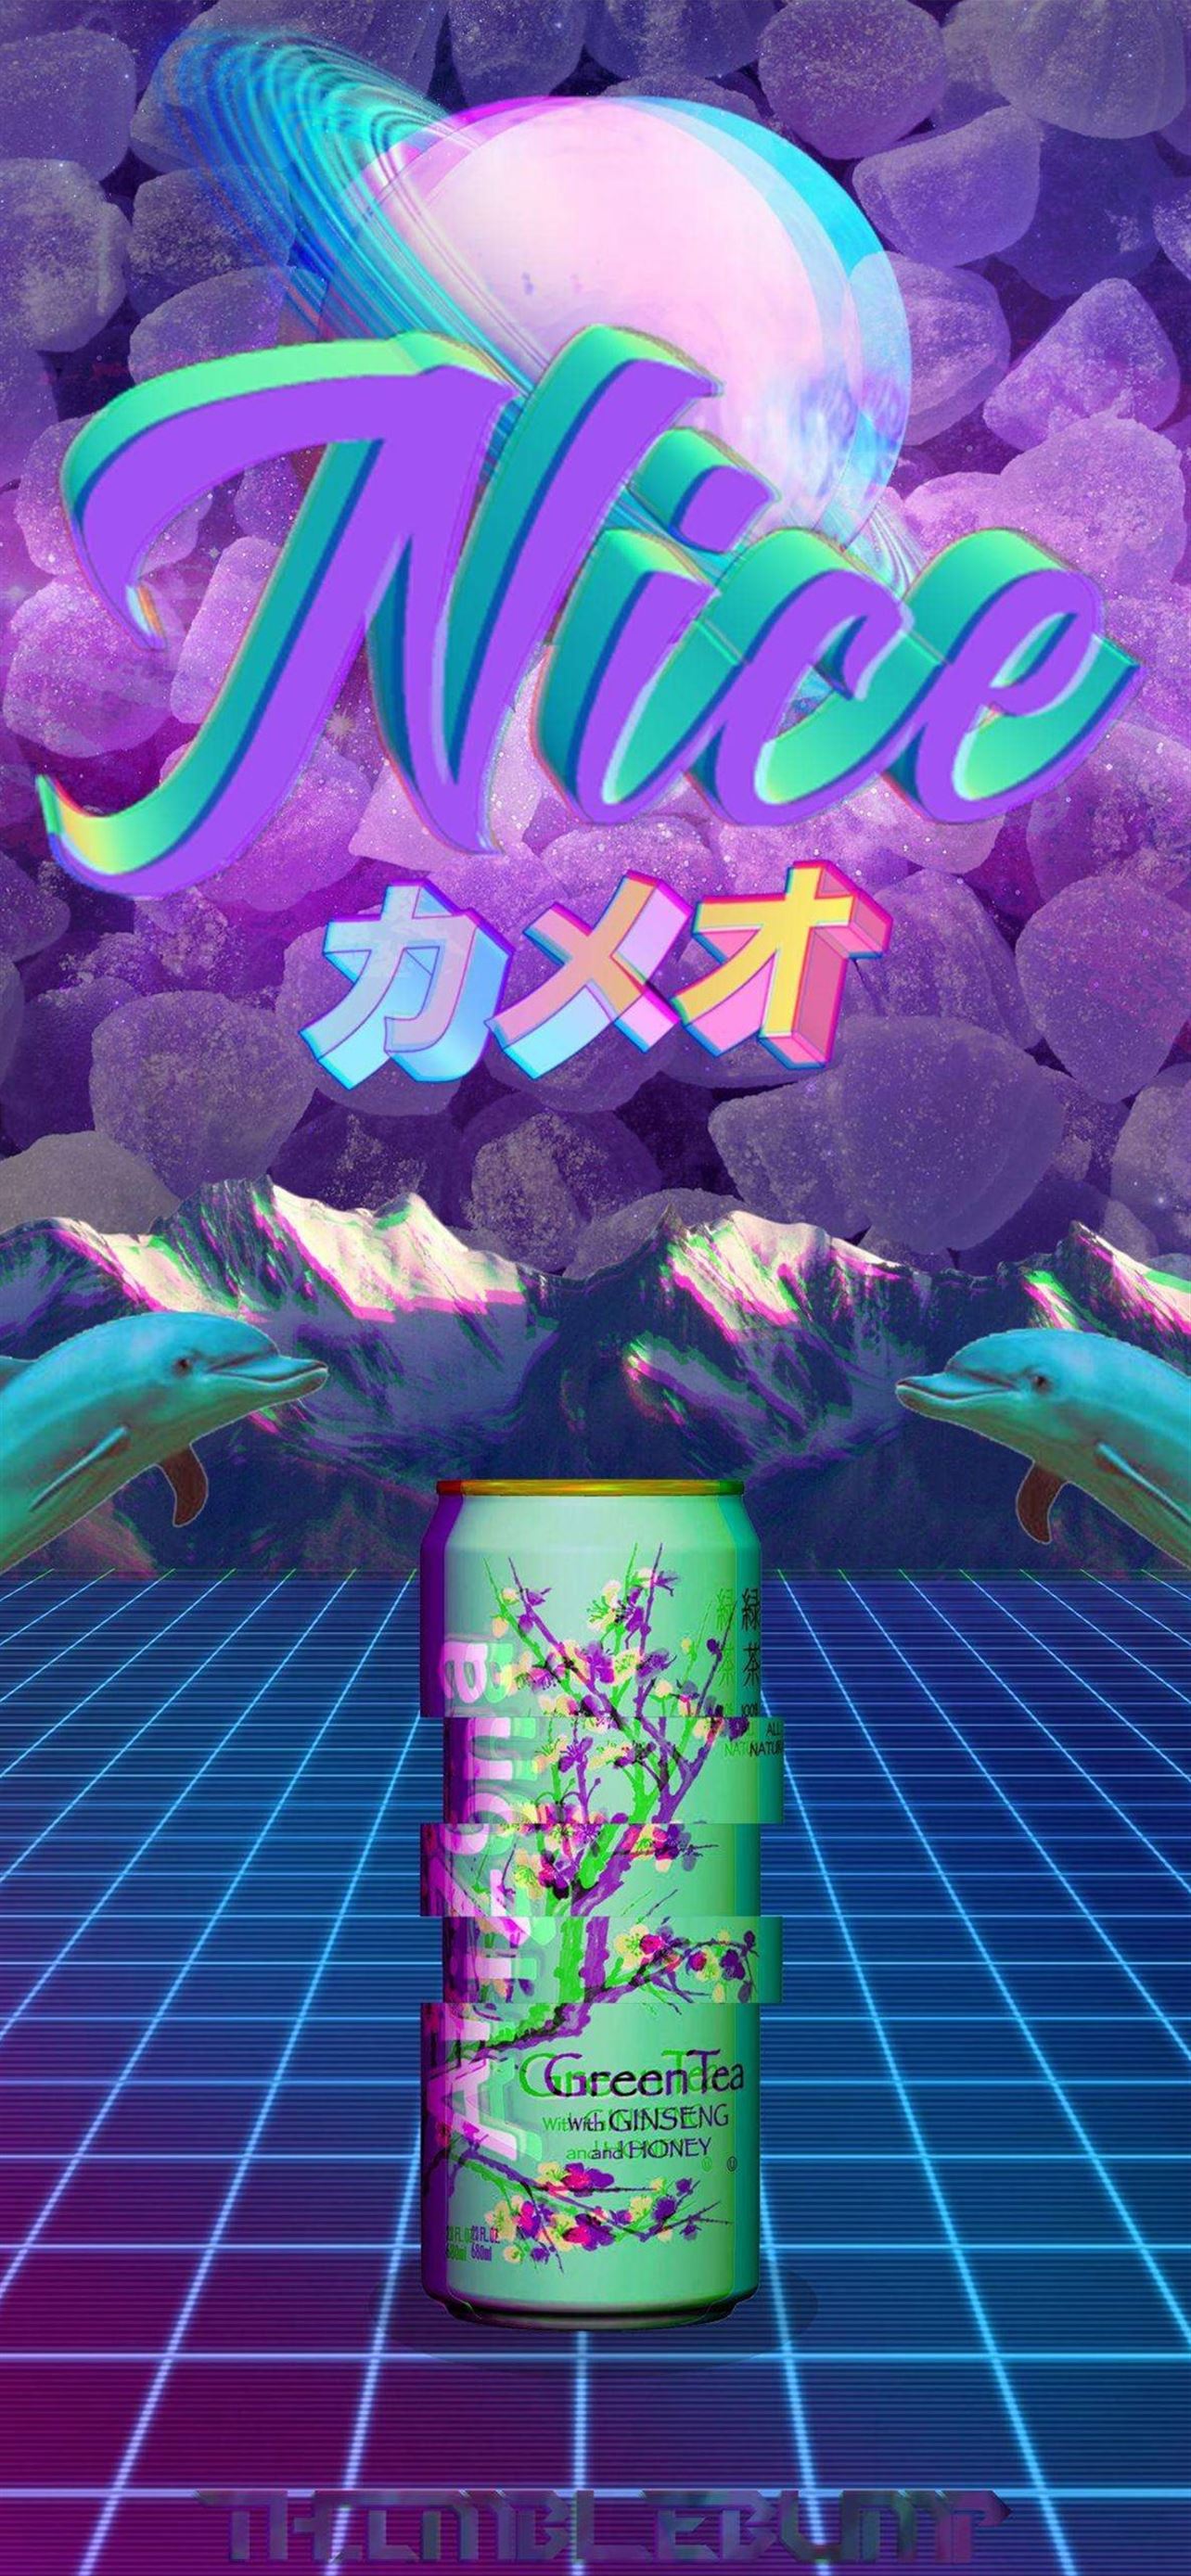 A poster of an alien with the words mice on it - Alien, vaporwave, Japanese, glitch